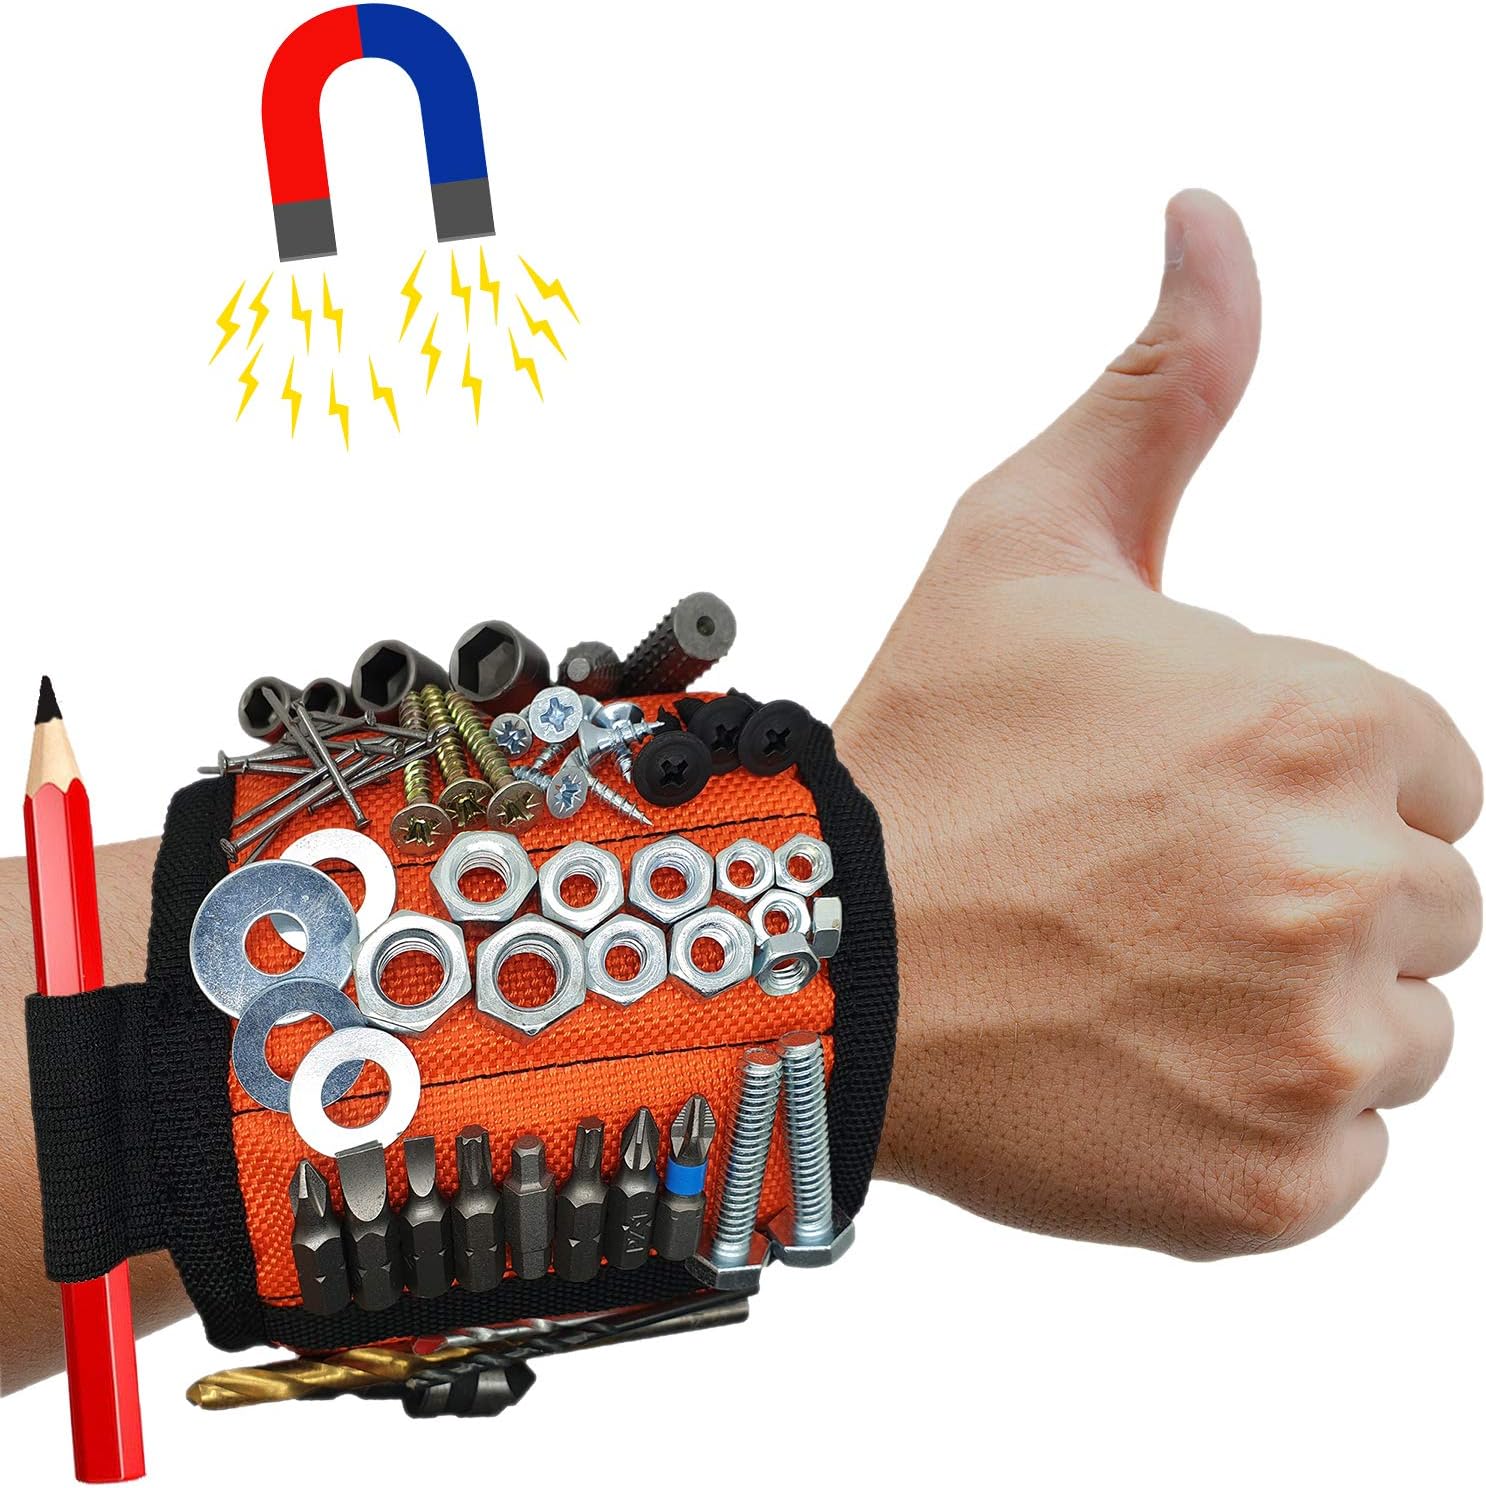 Magnetic Wristband for Holding Screws/Nails1